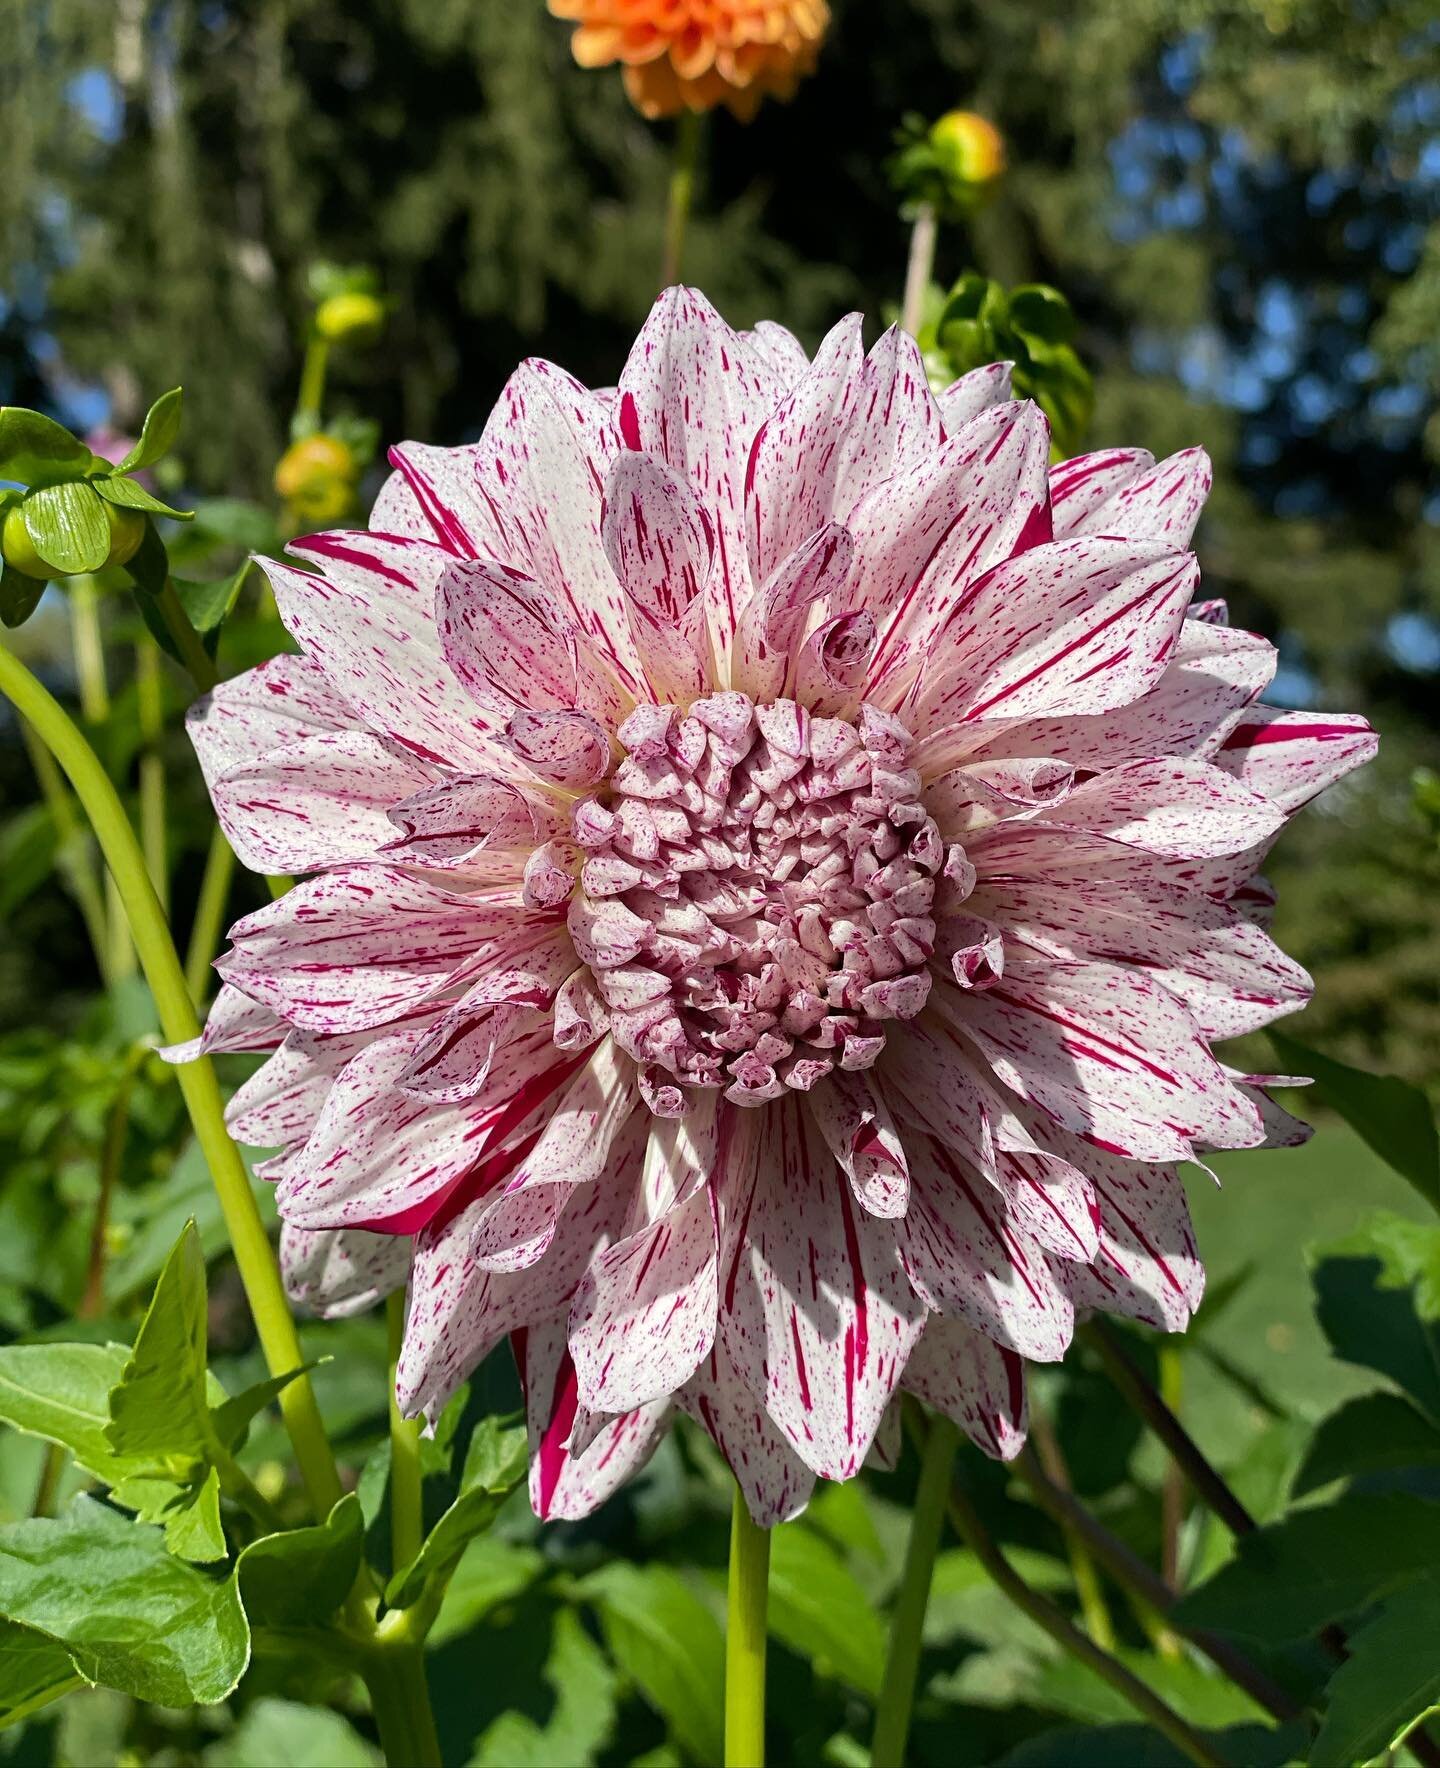 Surprise! Never saw this gorgeous dahlia before, I am obsessed. Happy Weekend! #flowerstagram #dahlias #landscapedesigner #gardendesign